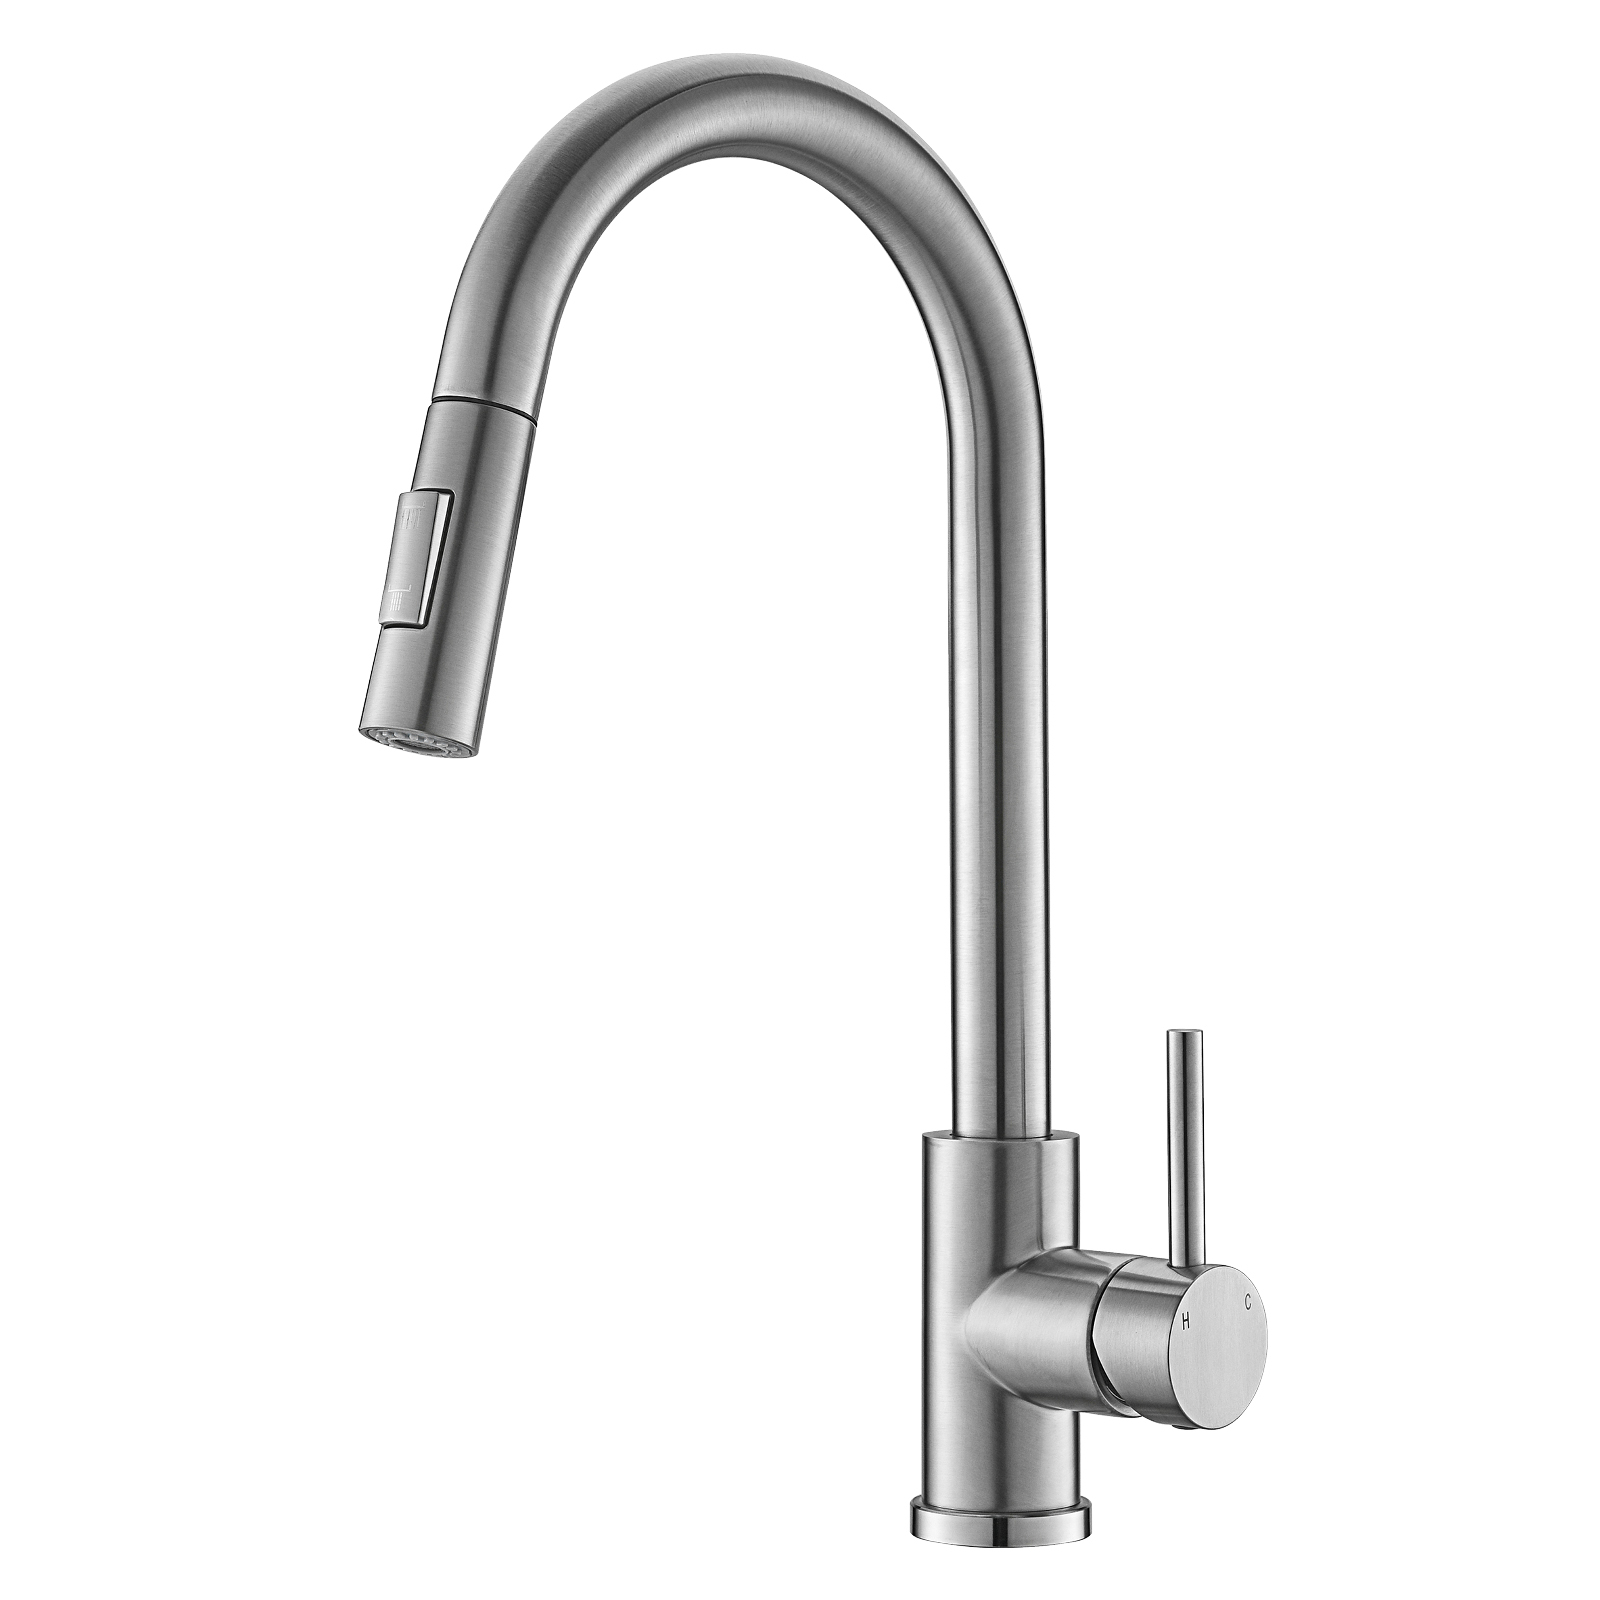 Asp209BN 2021 Modern Stainless Steel Brushed Nickel Plated Pull Down Kitchen Faucet For Water Sink